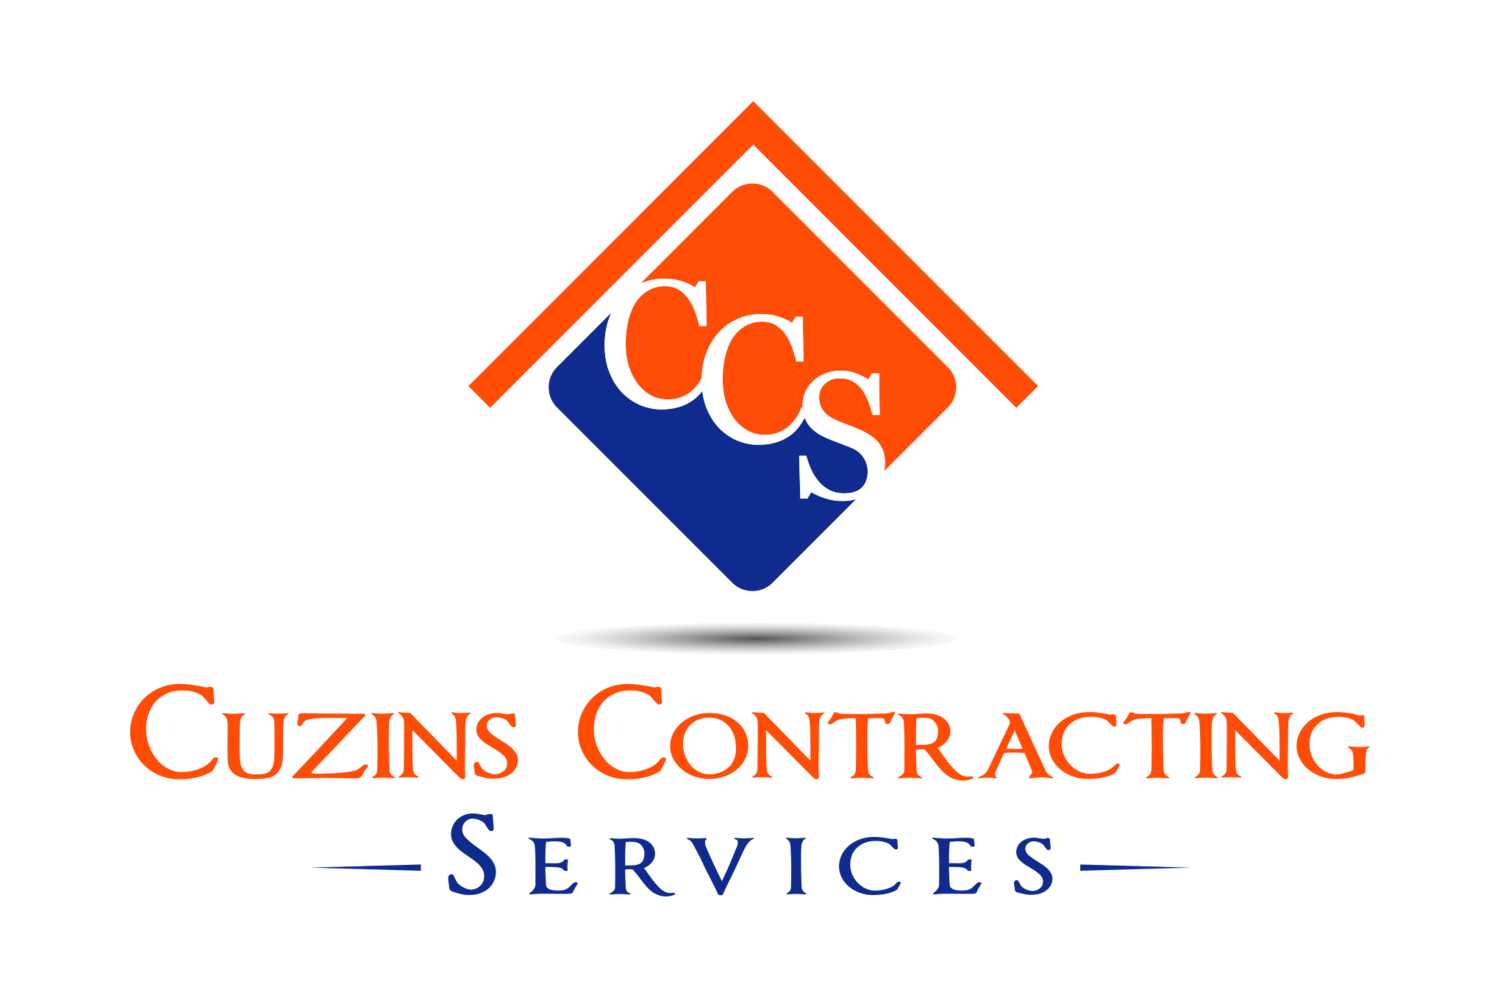 Cuzins Contracting Services